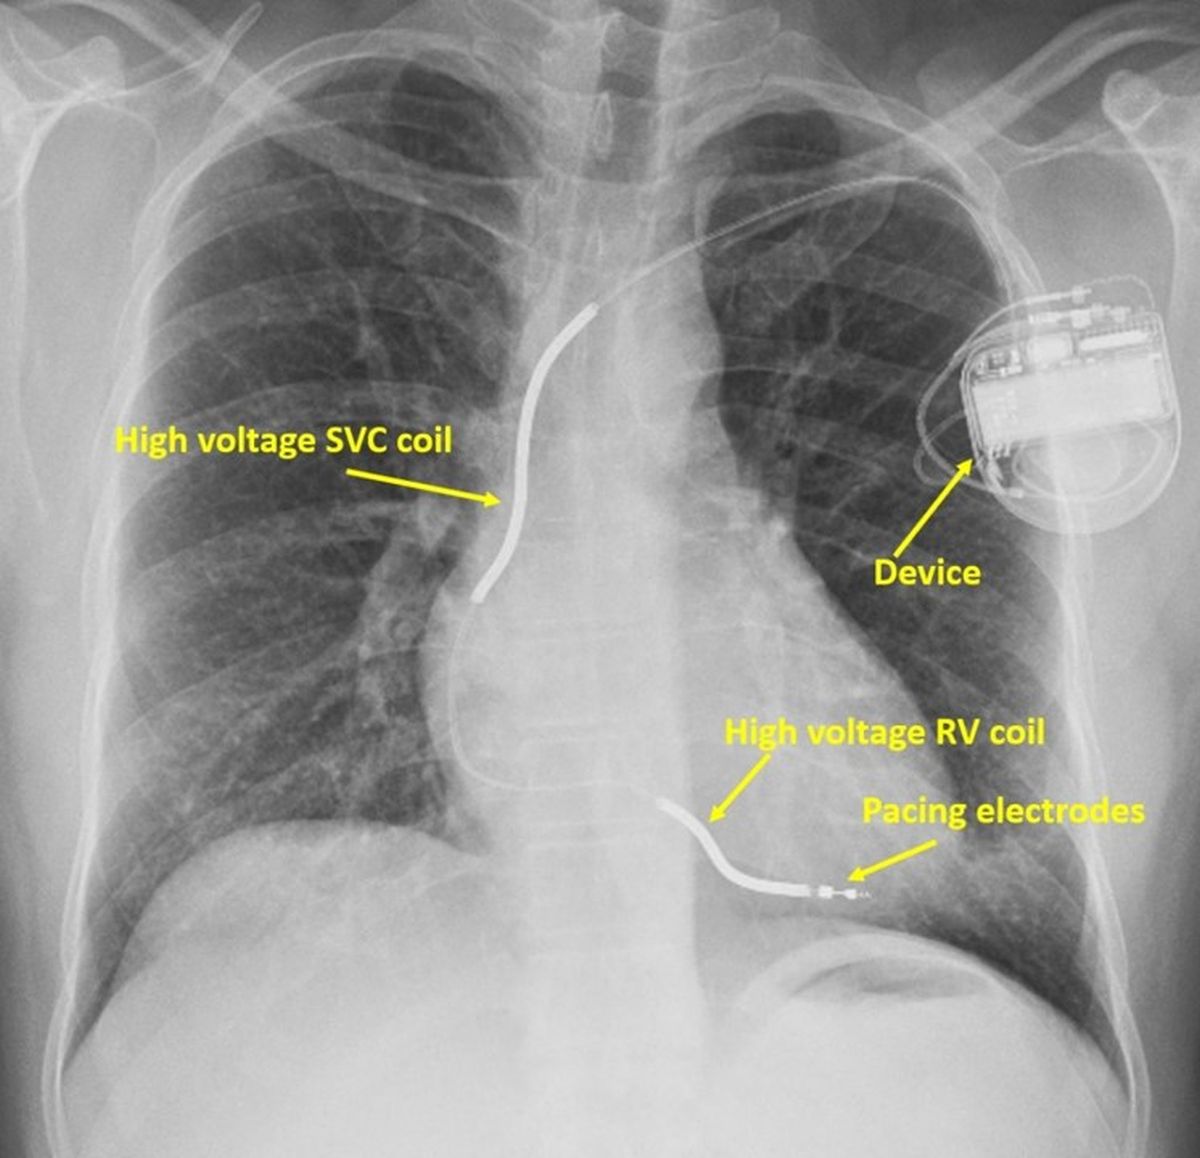 X-ray of a person with ICD, showing high voltage shocking coils and pacing electrodes